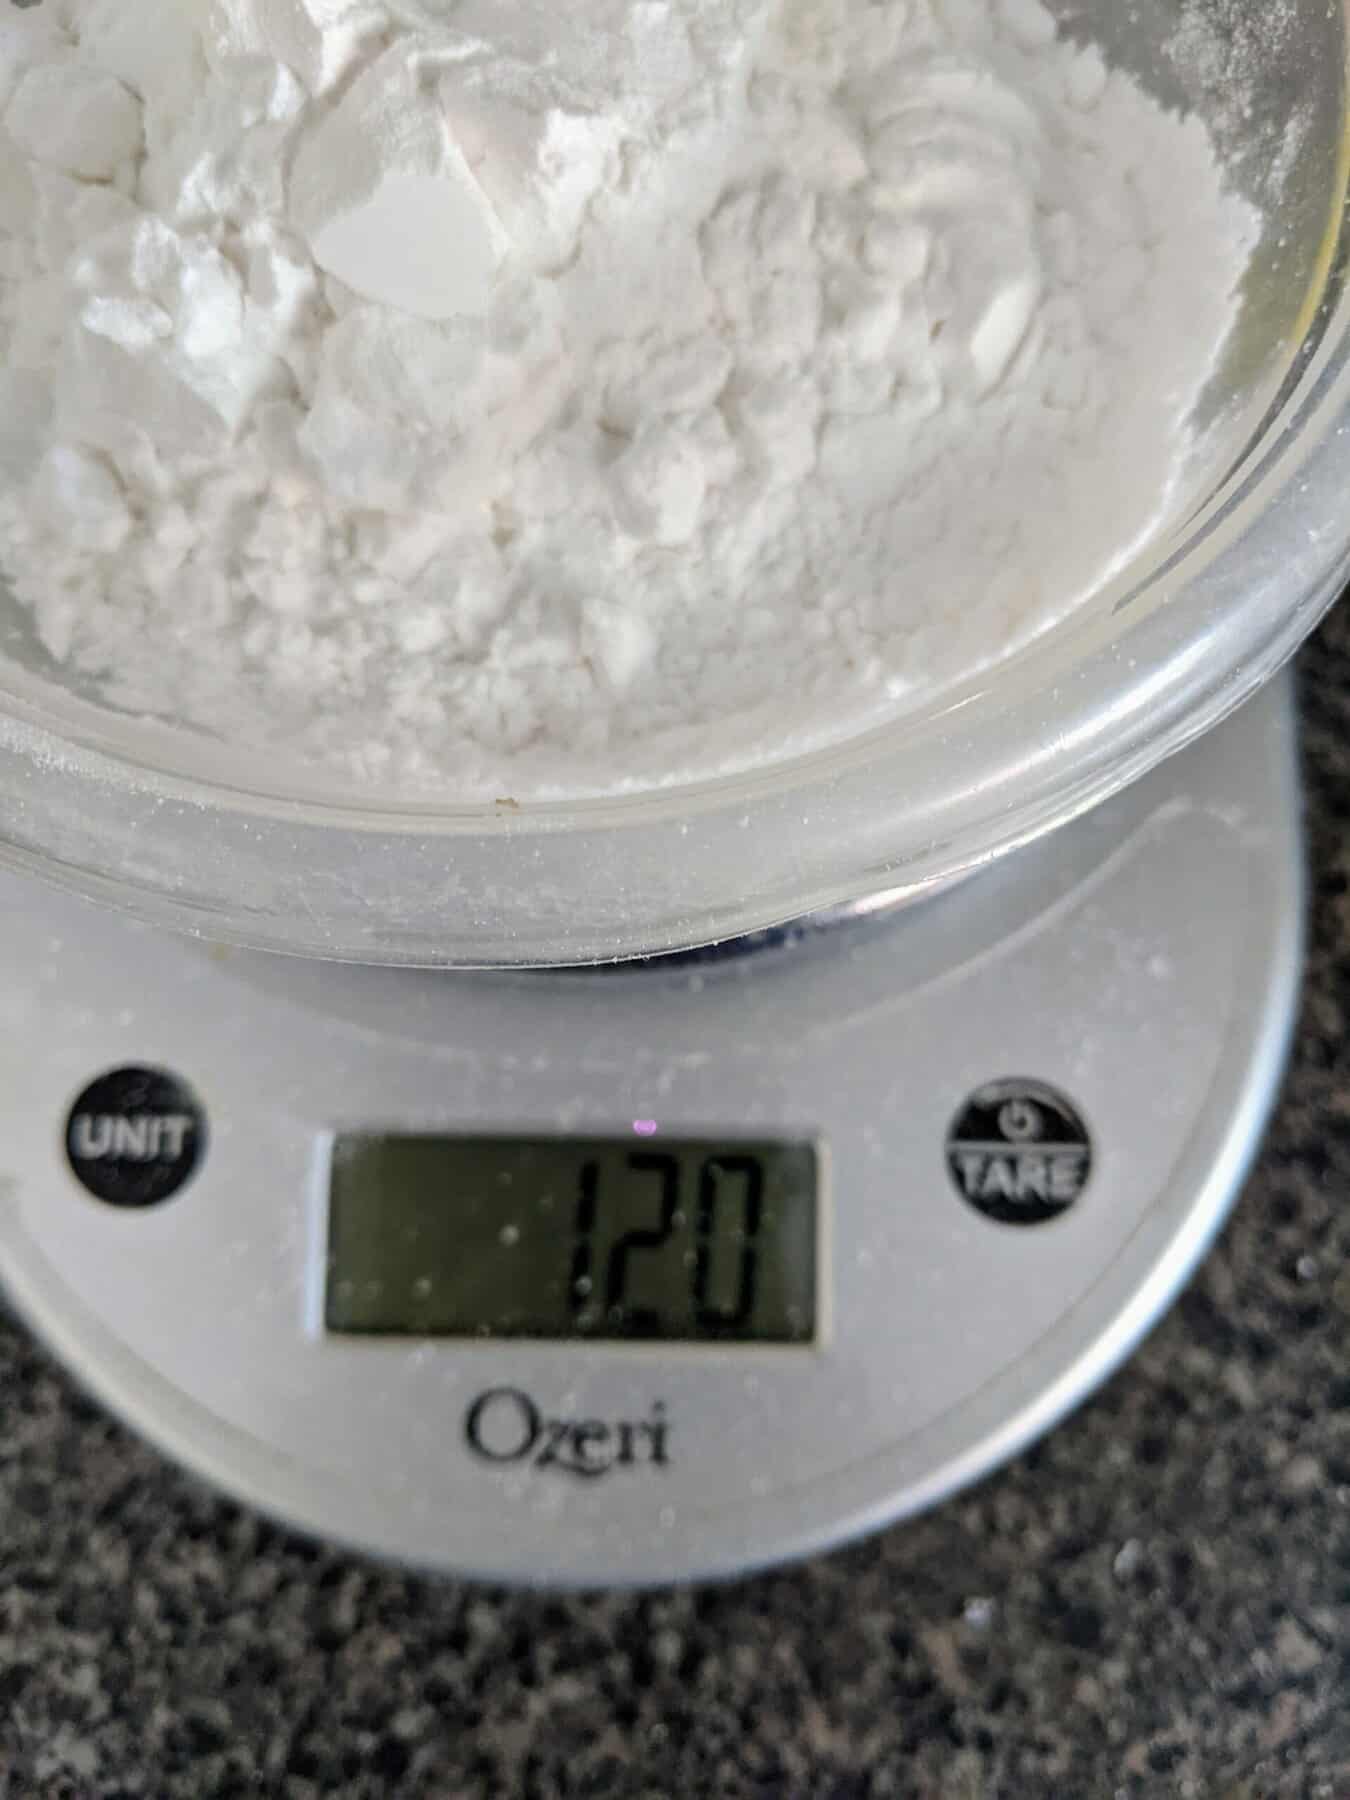 digital scale with flour weighed on it.